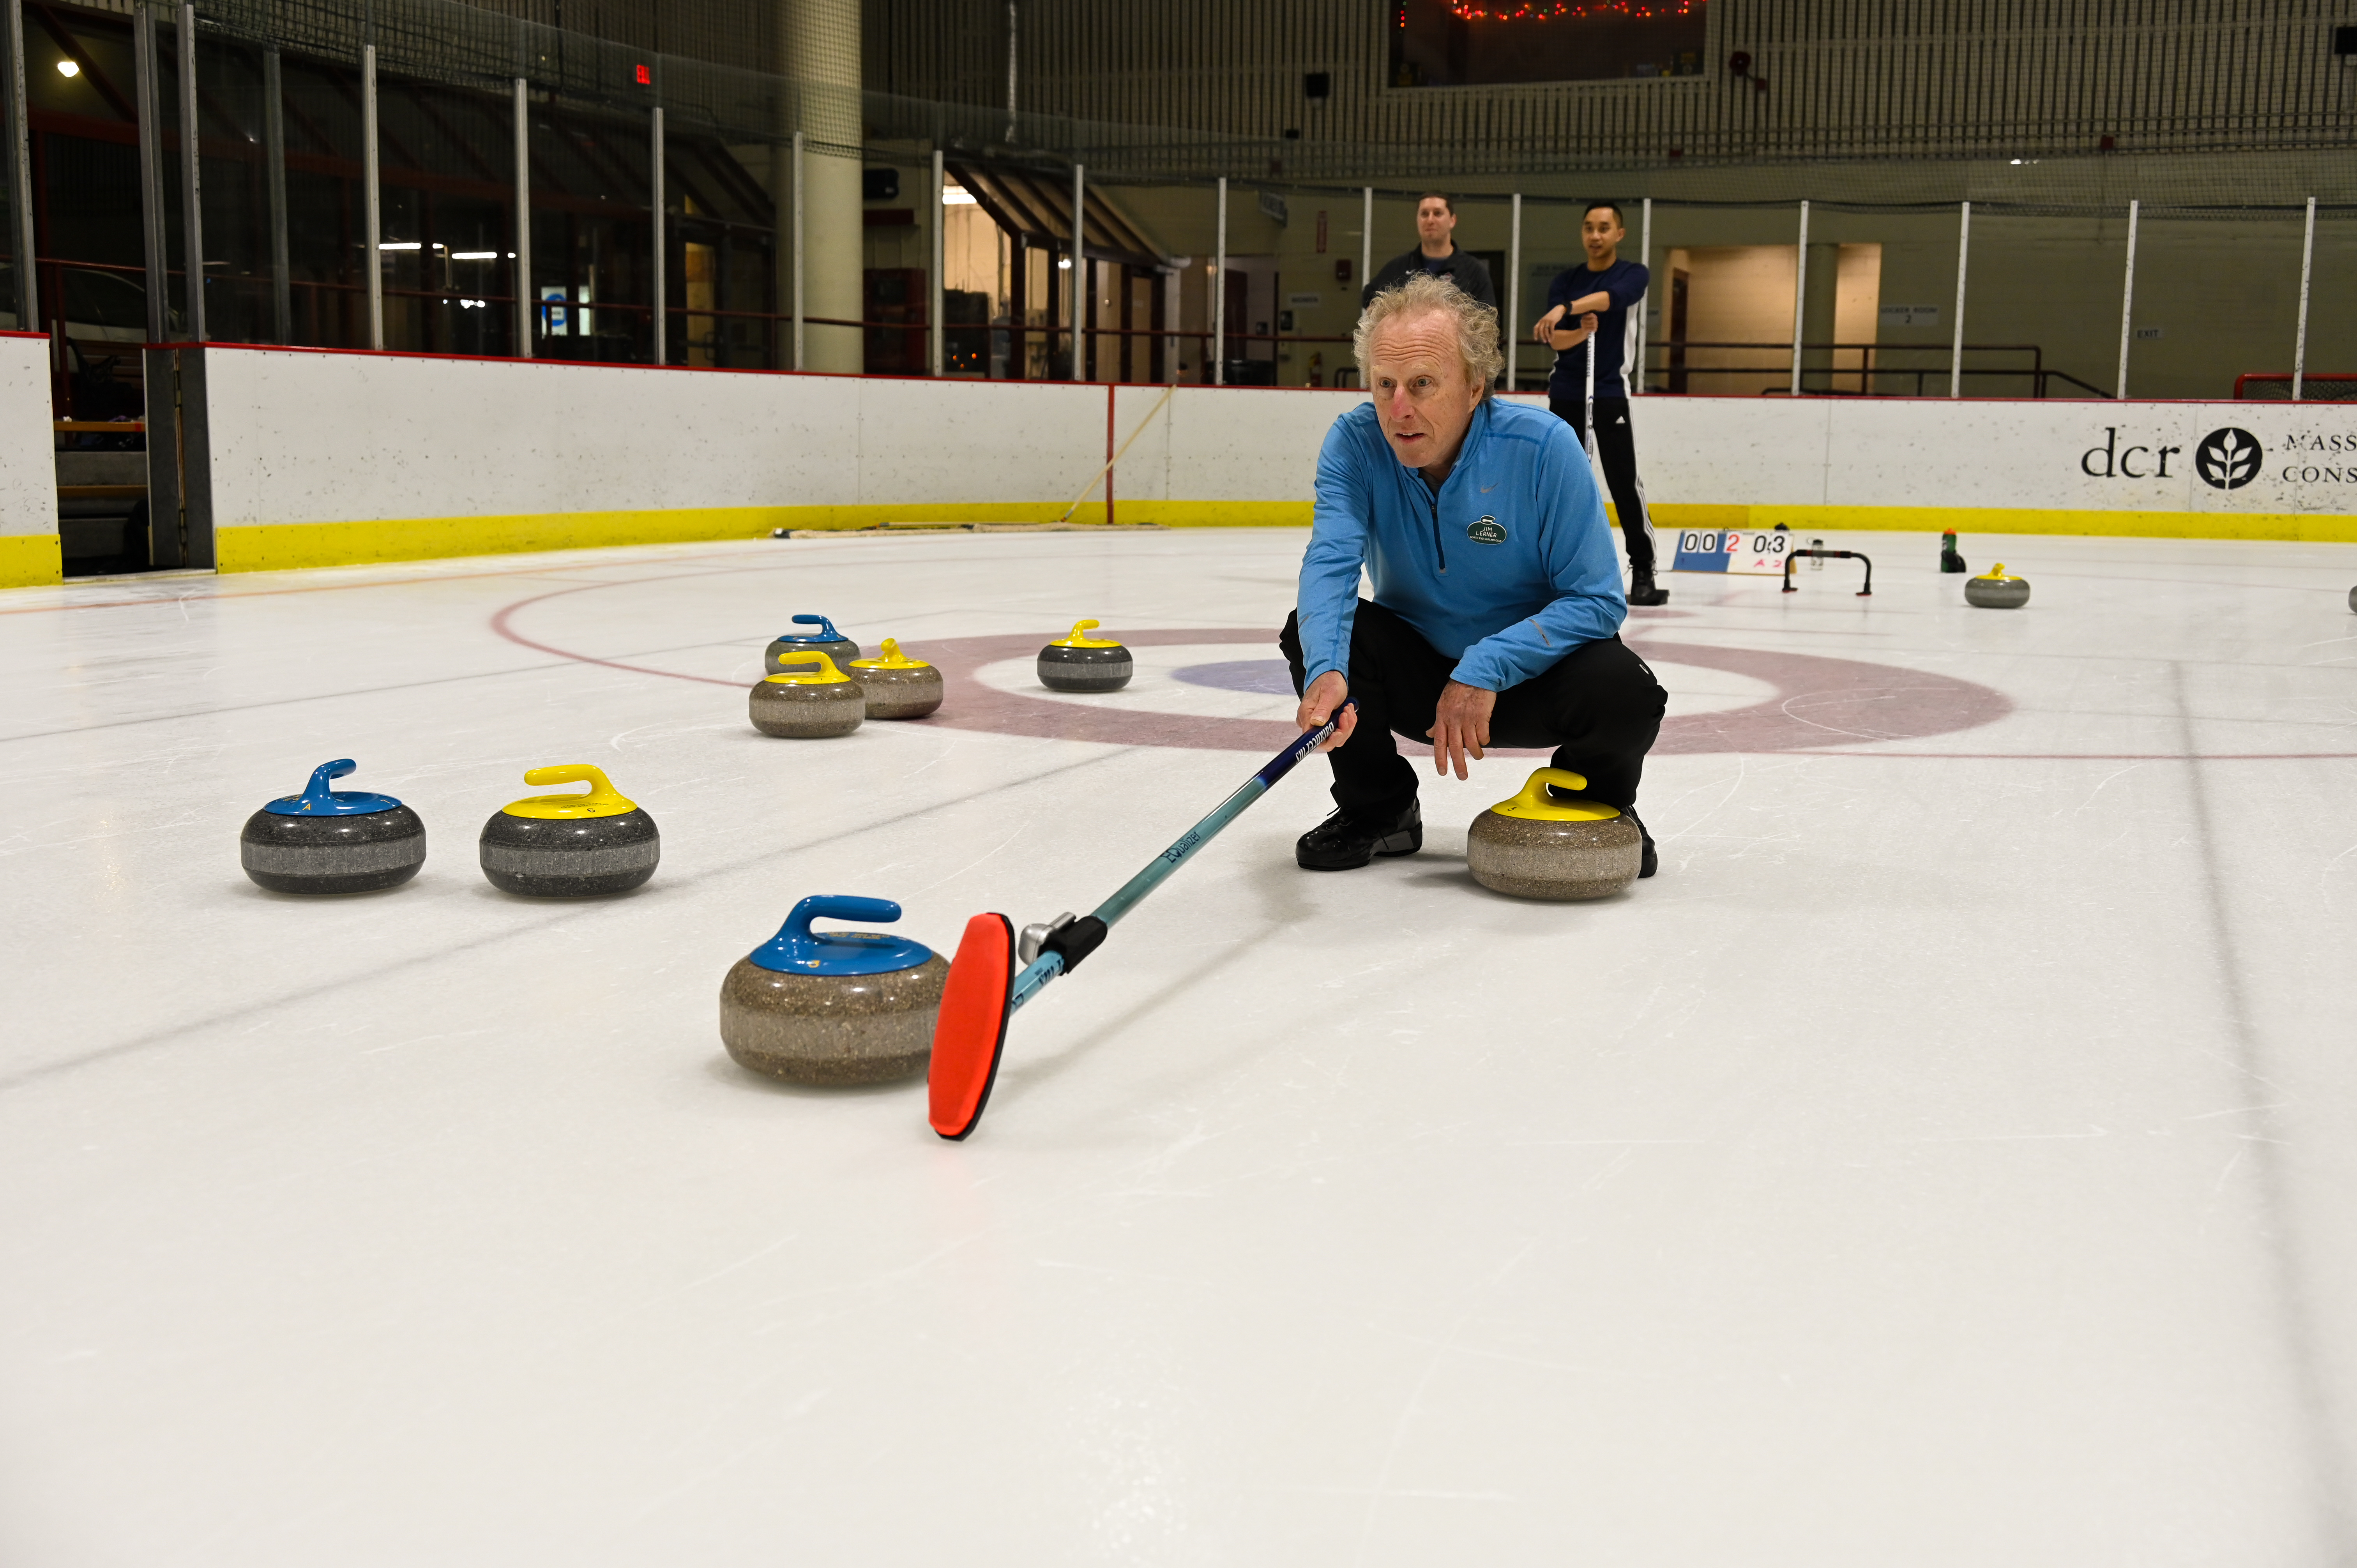 Learn to Curl